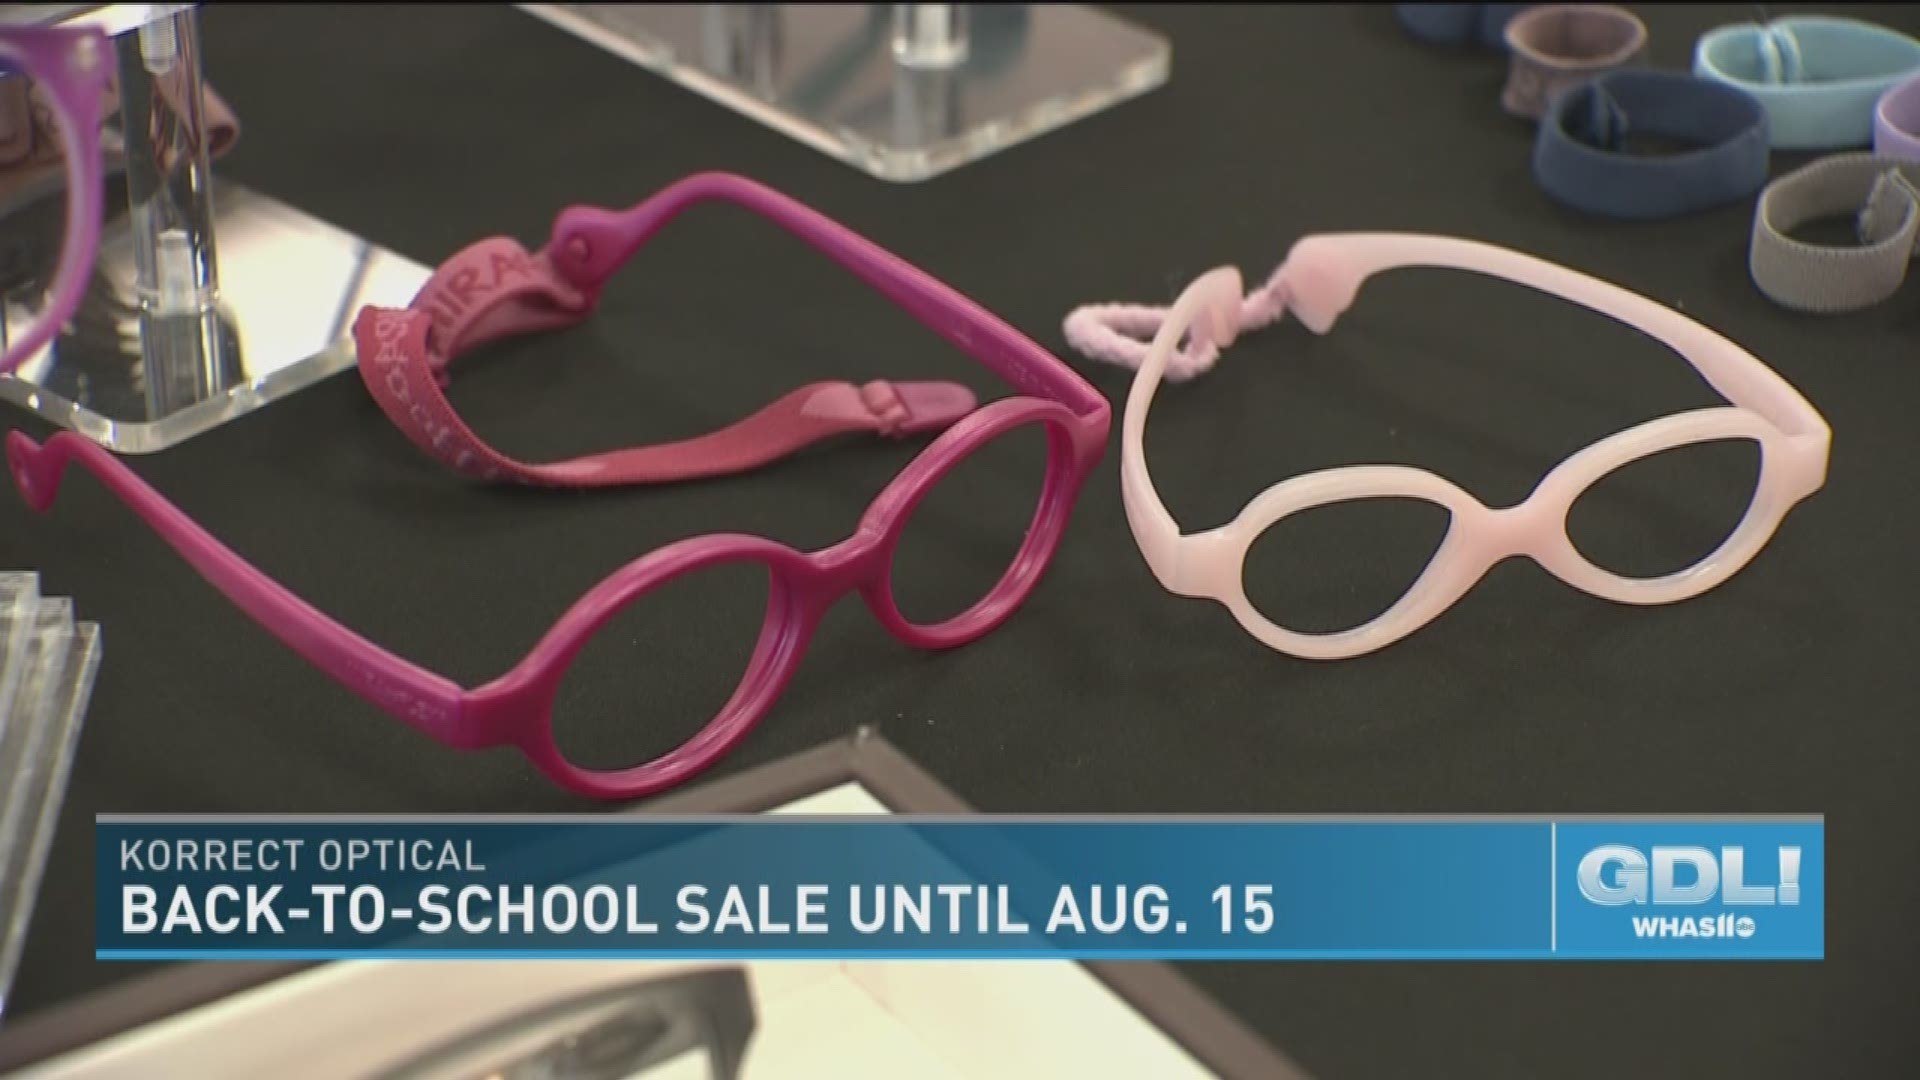 Angie Fenton is off Dutchmans Lane at Korrect Optical with details on a back to school sale on eyewear and exams, running now through August 15, 2018.